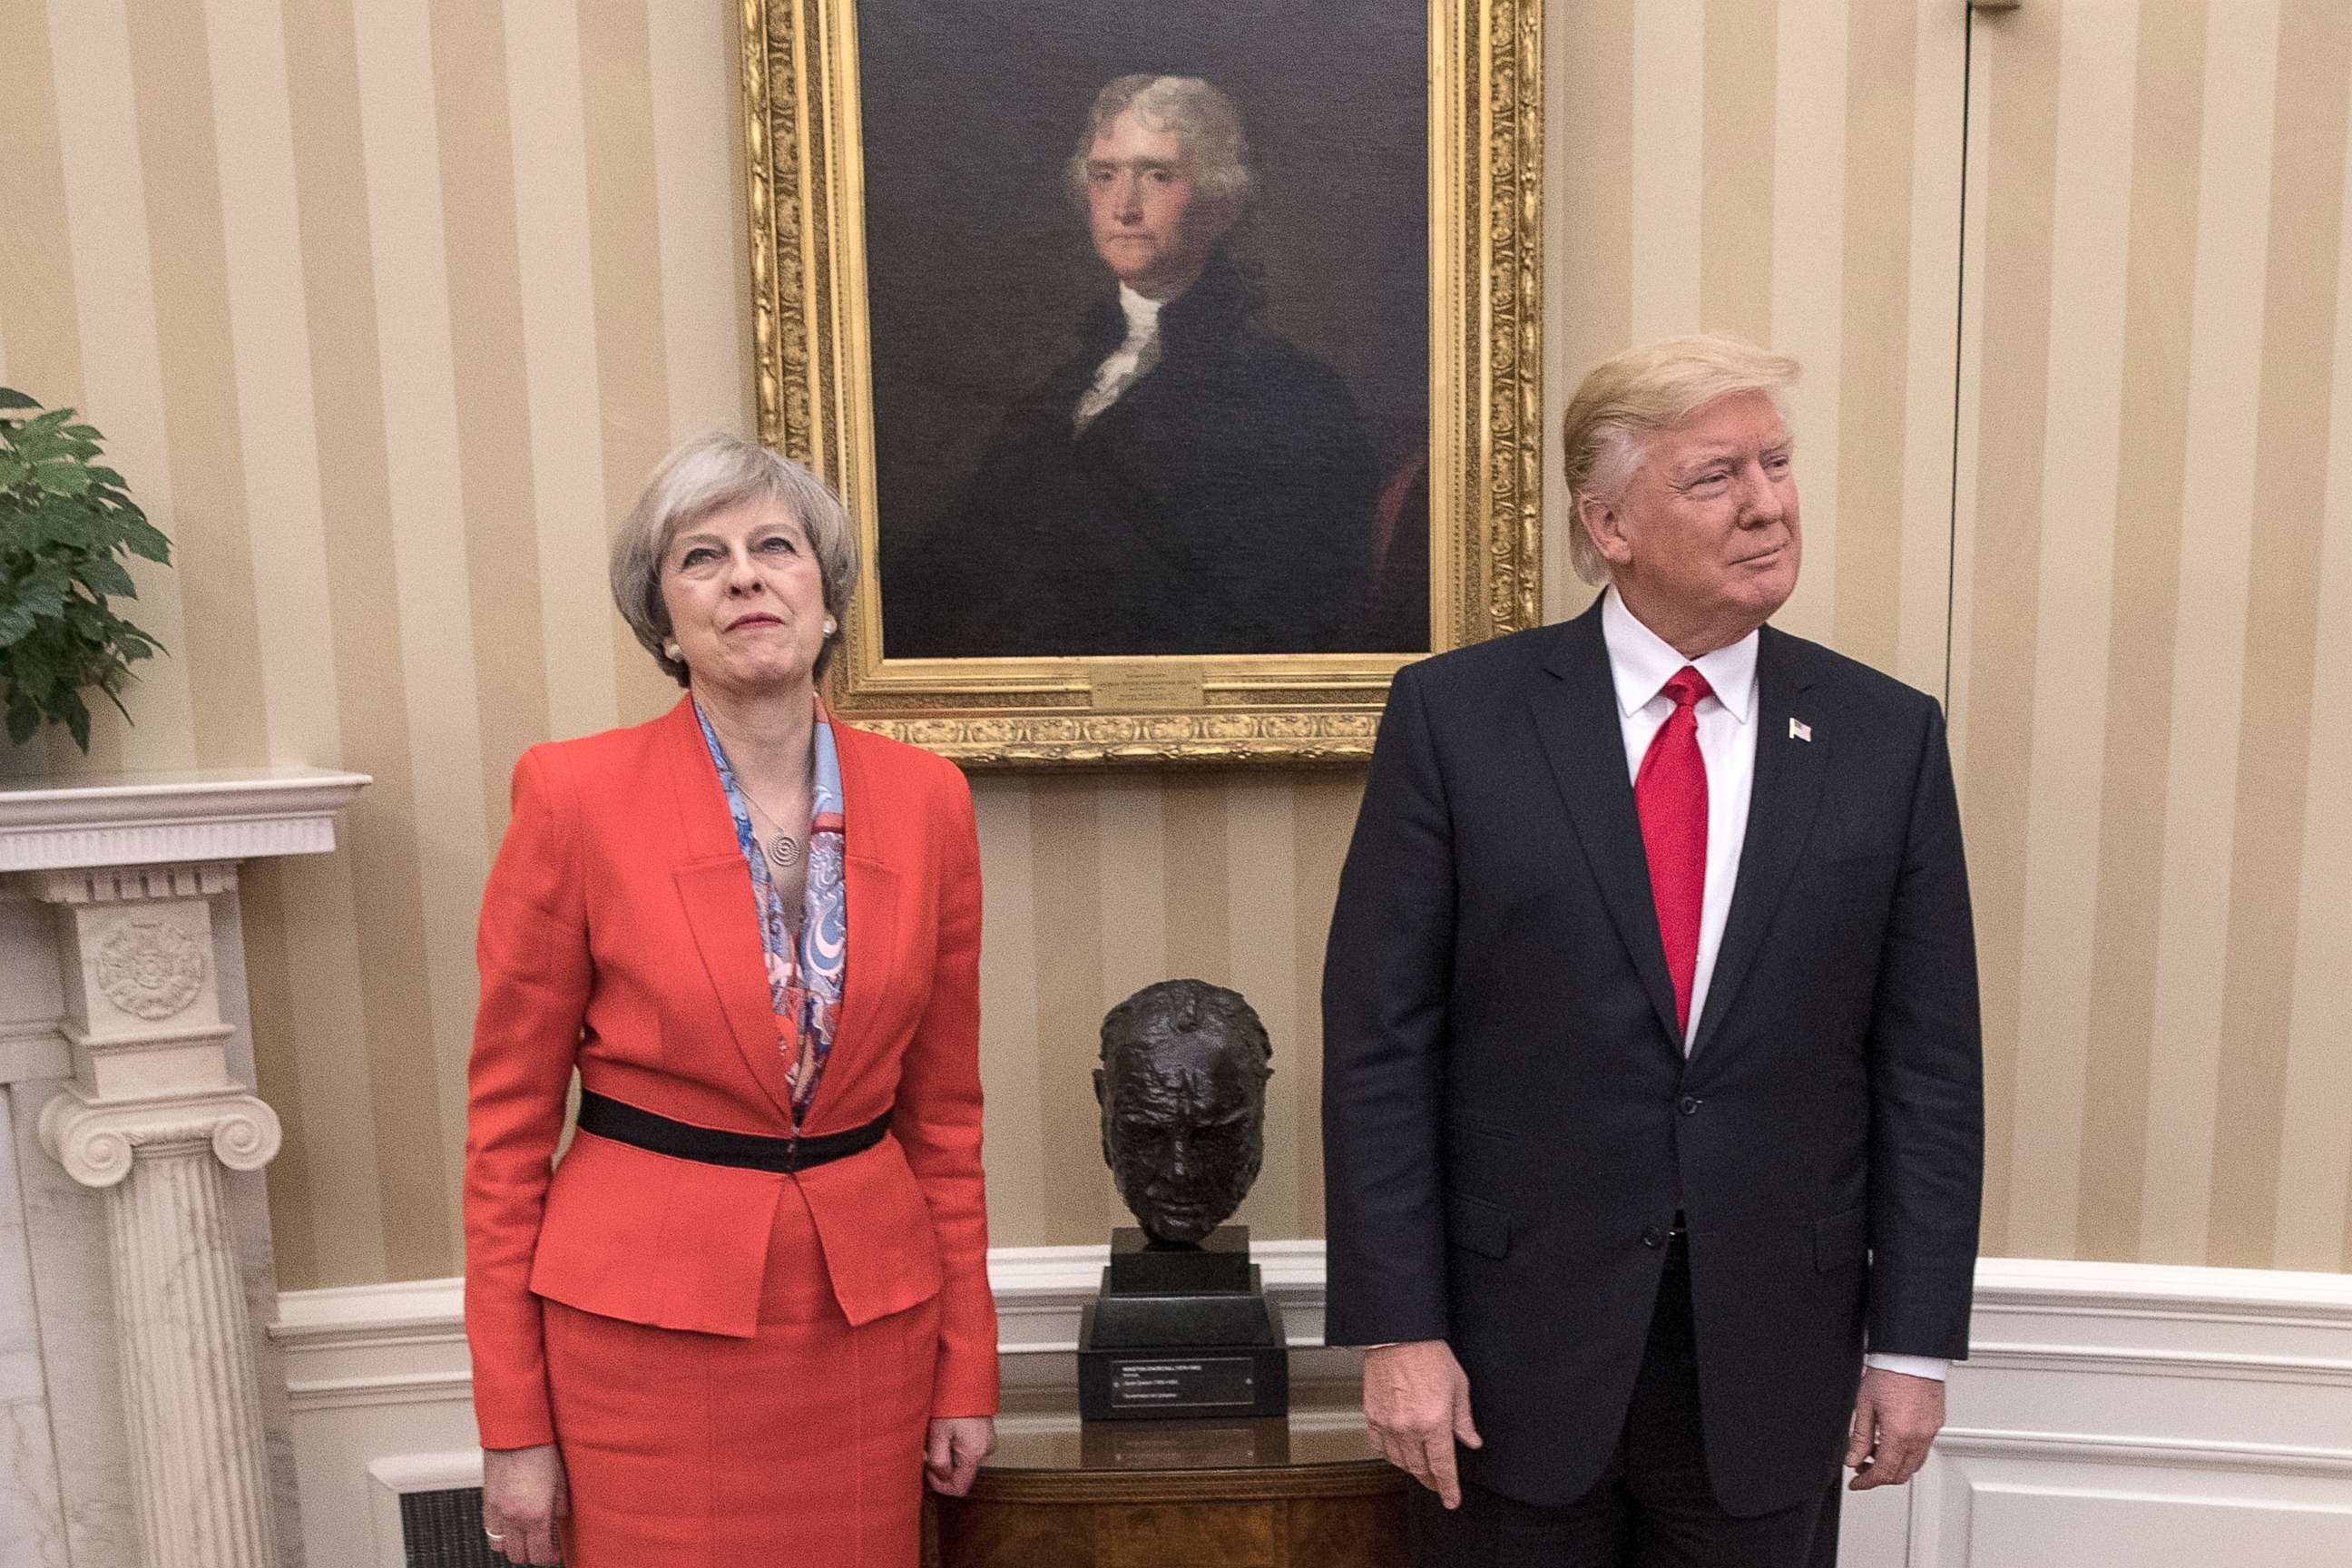 PHOTO: British Prime Minister Theresa May is pictured with President Donald Trump at The White House on Jan. 27, 2017 in Washington.